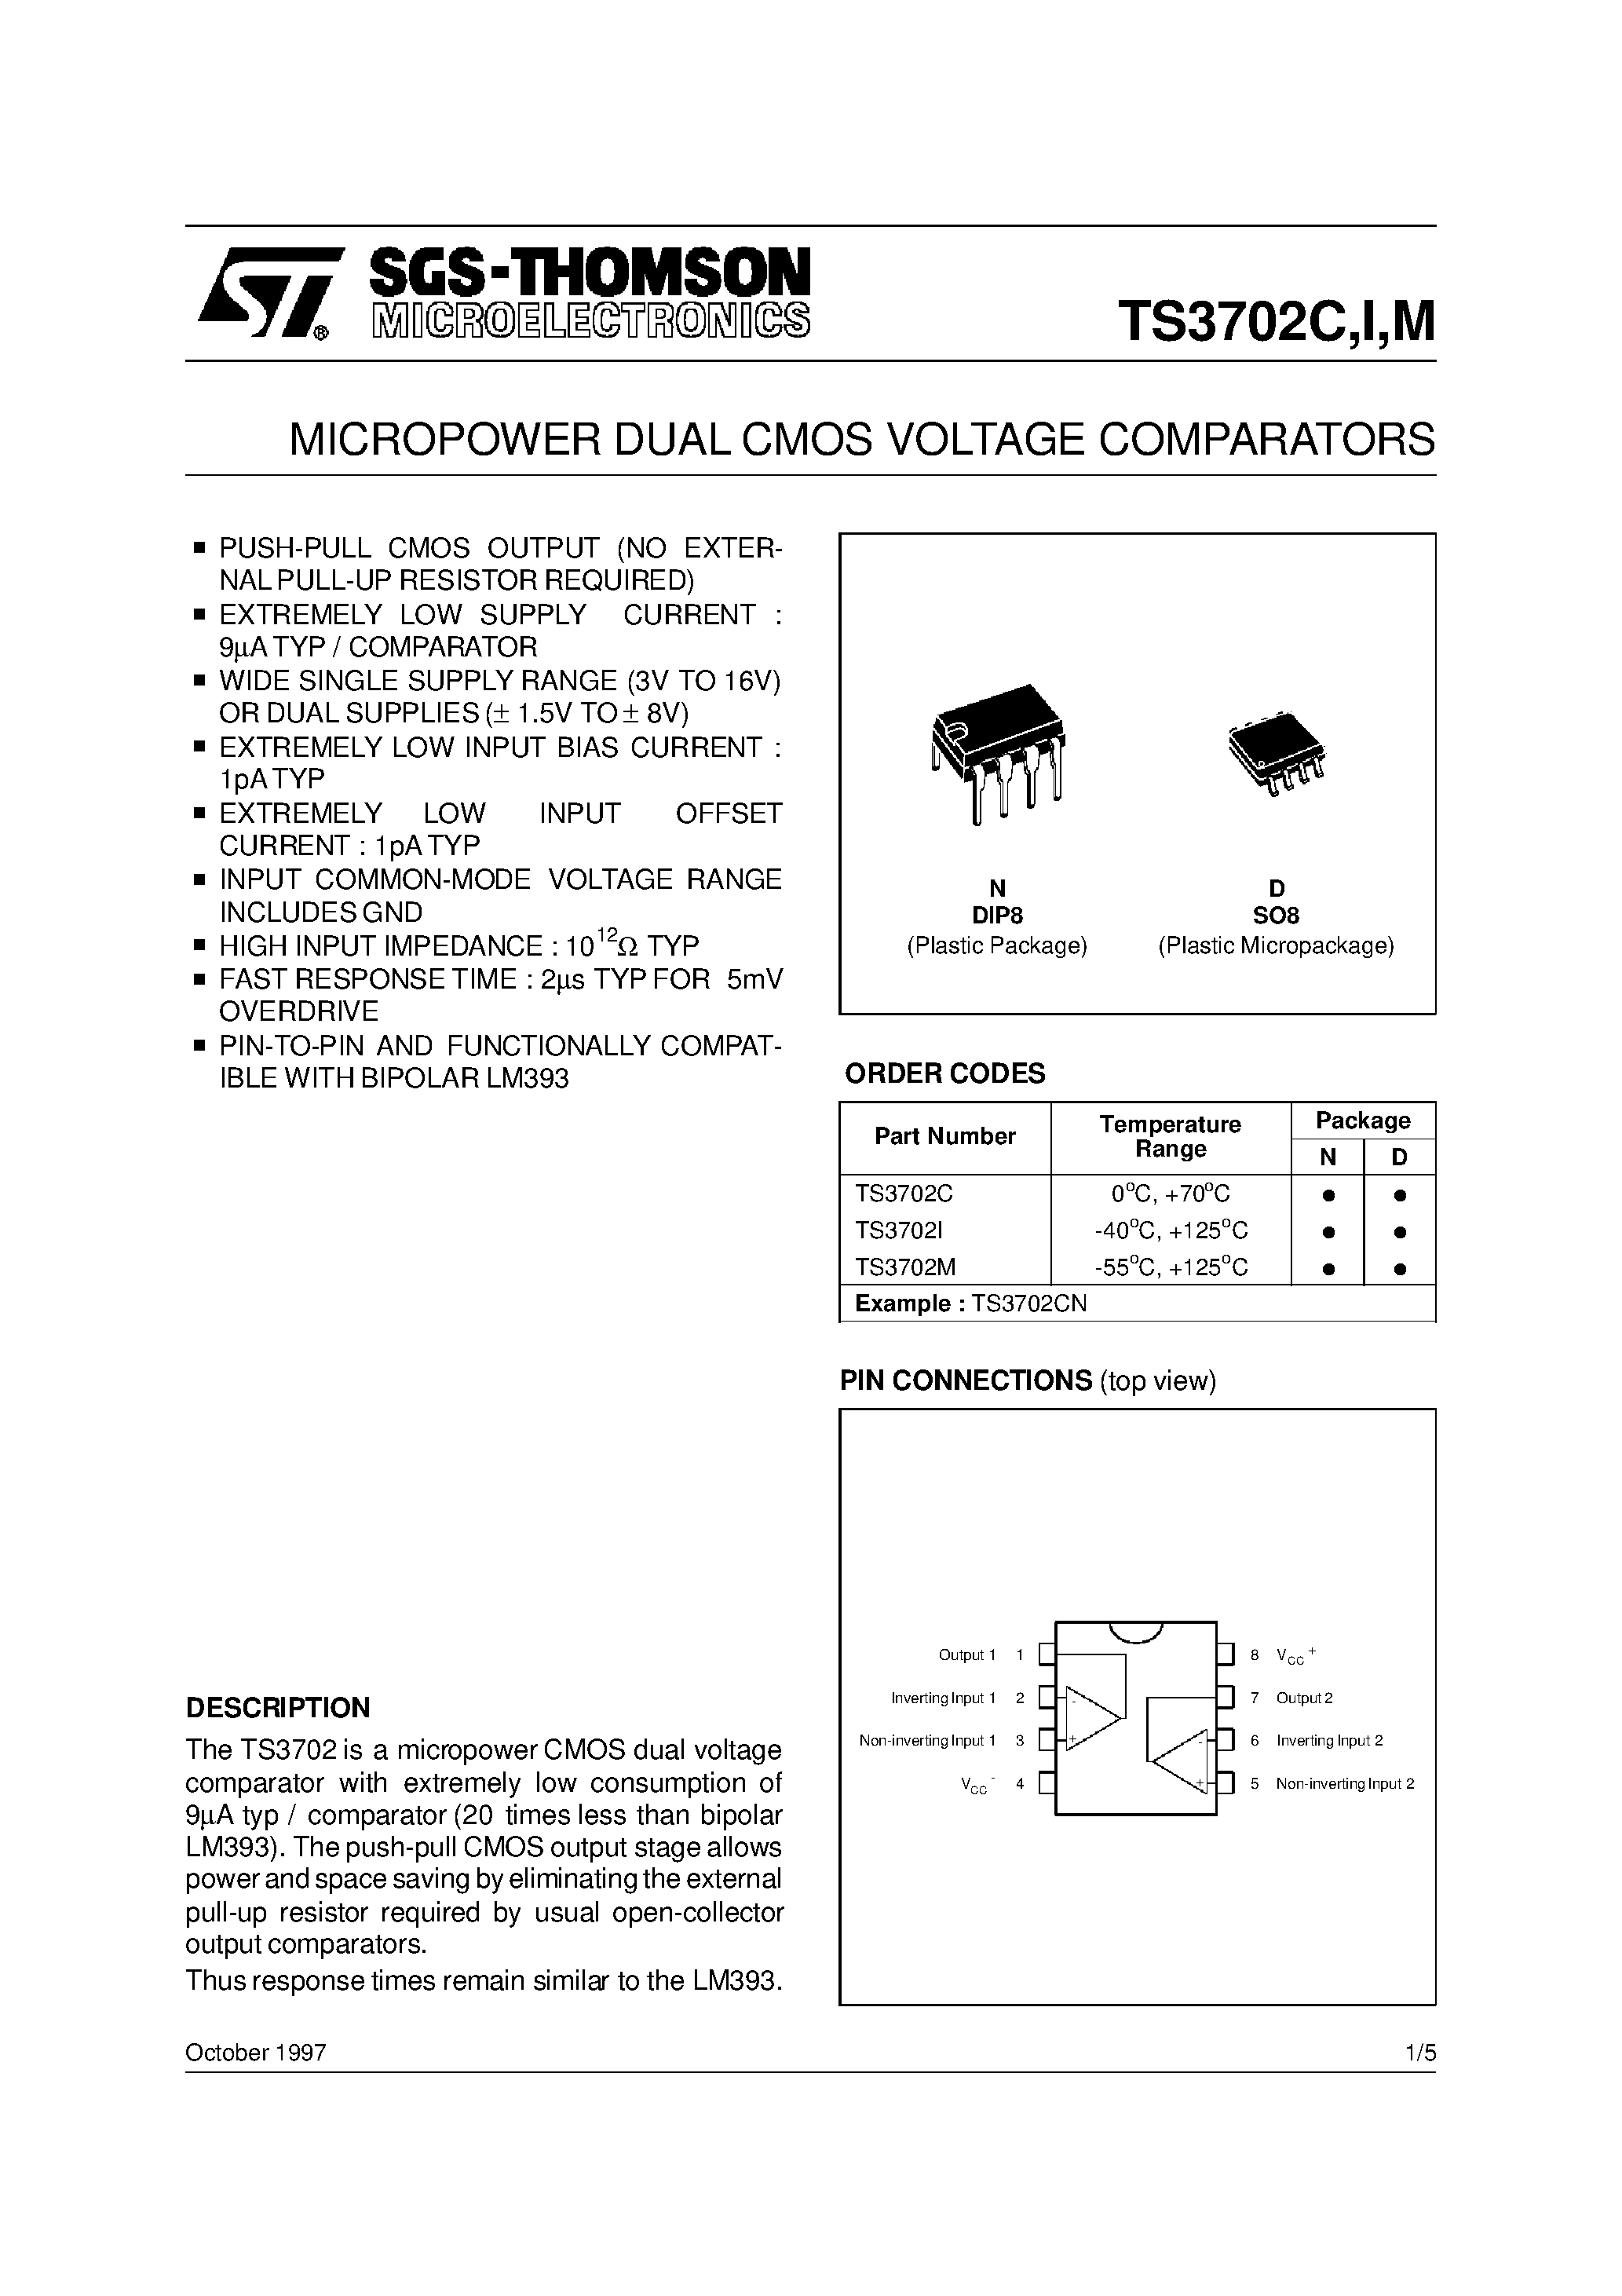 Datasheet TS3702M - MICROPOWER DUAL CMOS VOLTAGE COMPARATORS page 1